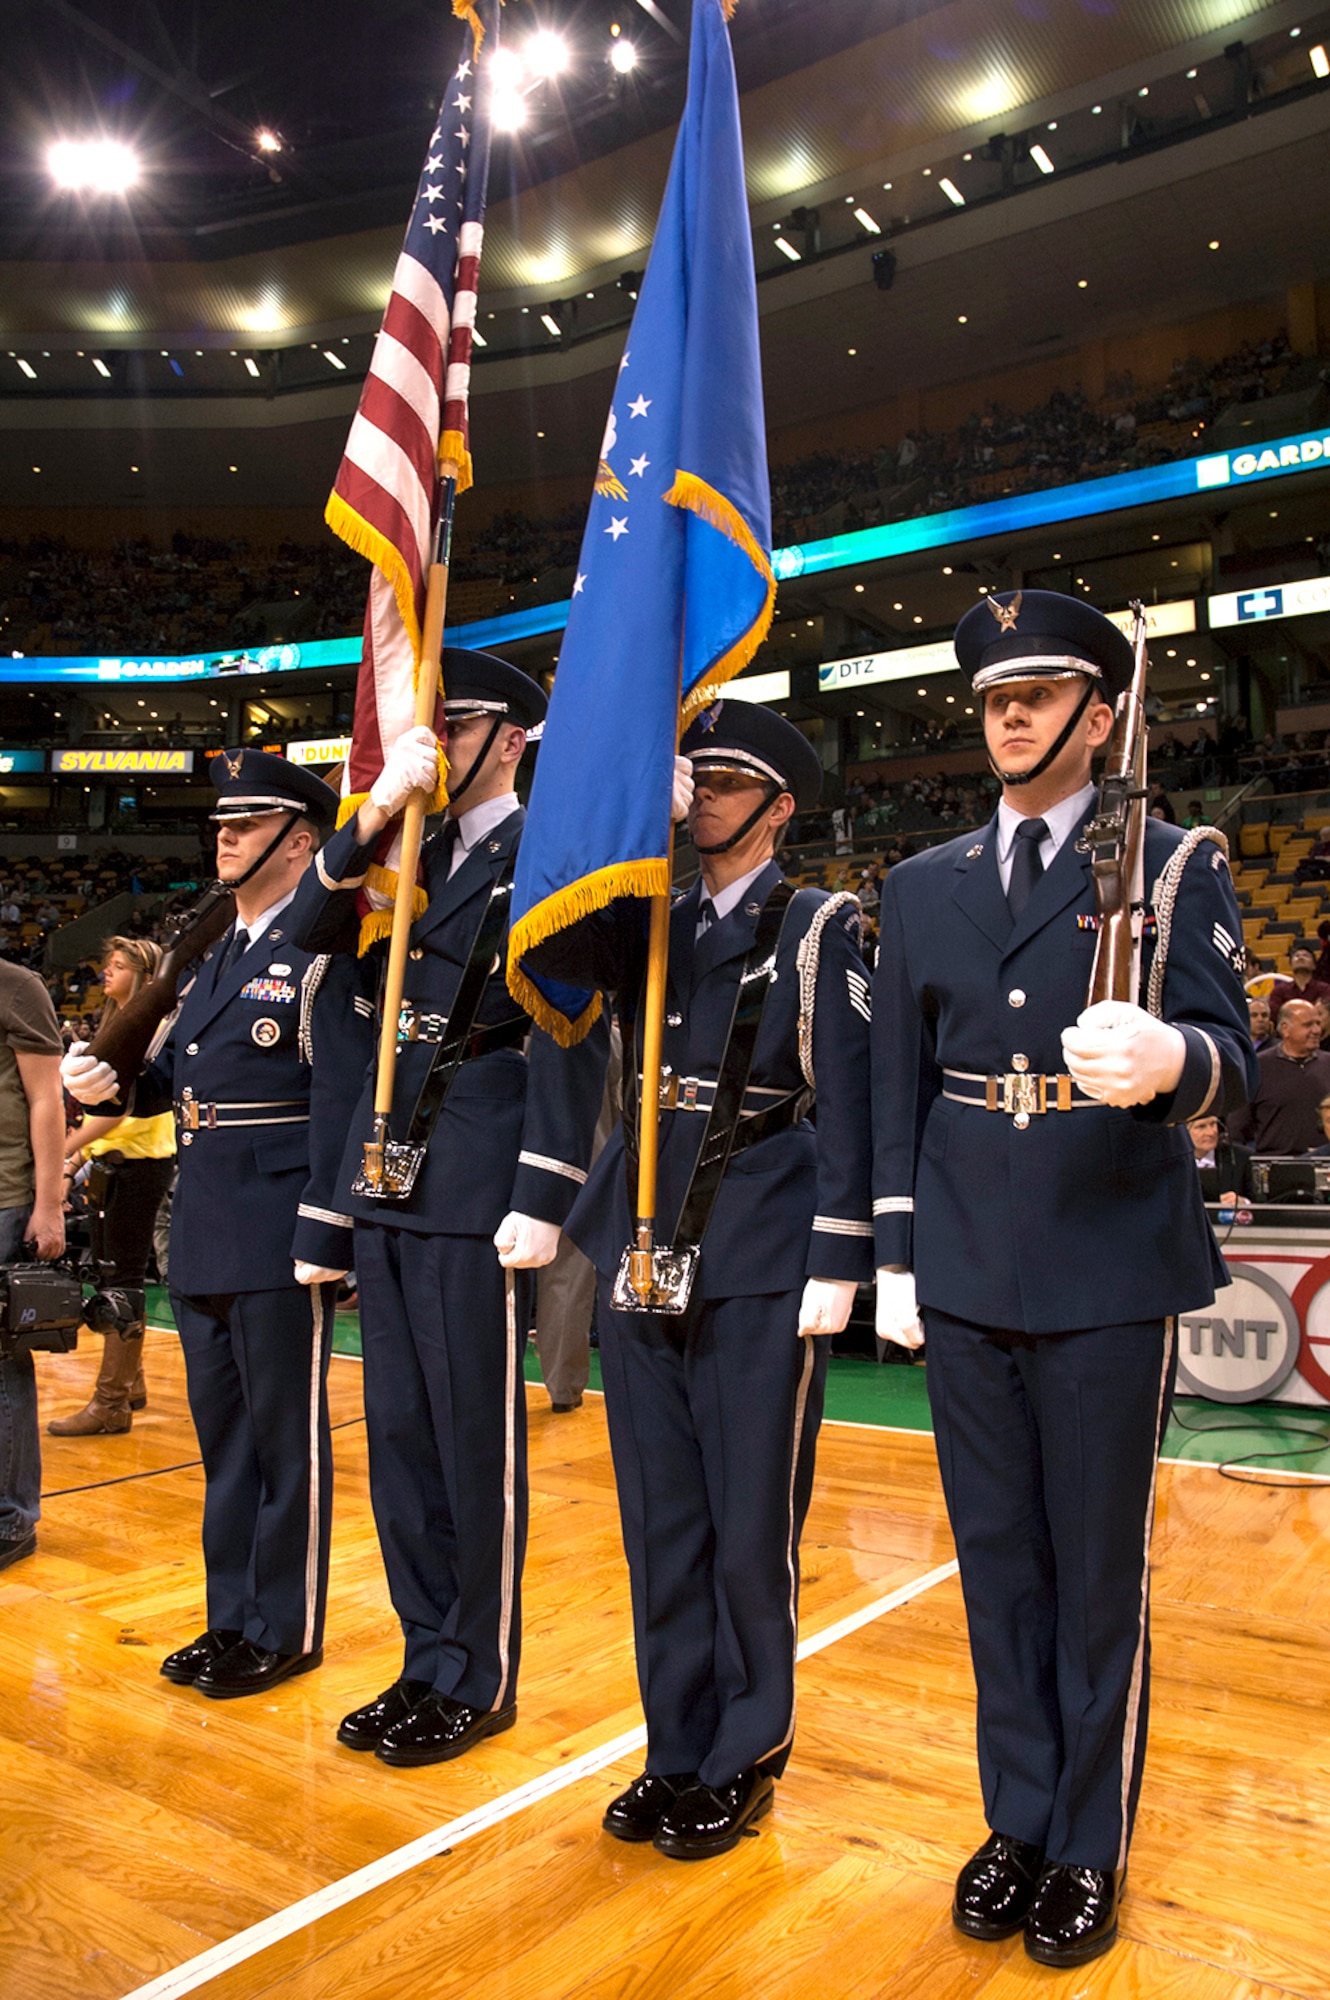 BOSTON – The Patriot Honor Guard stands in position moments before the national anthem at the Boston Celtics vs. Los Angeles Lakers basketball game at TD Garden Feb. 7. The honor guard represents the Air Force at many sporting events throughout the region. (U.S. Air Force photo by Lance H. Beebe)